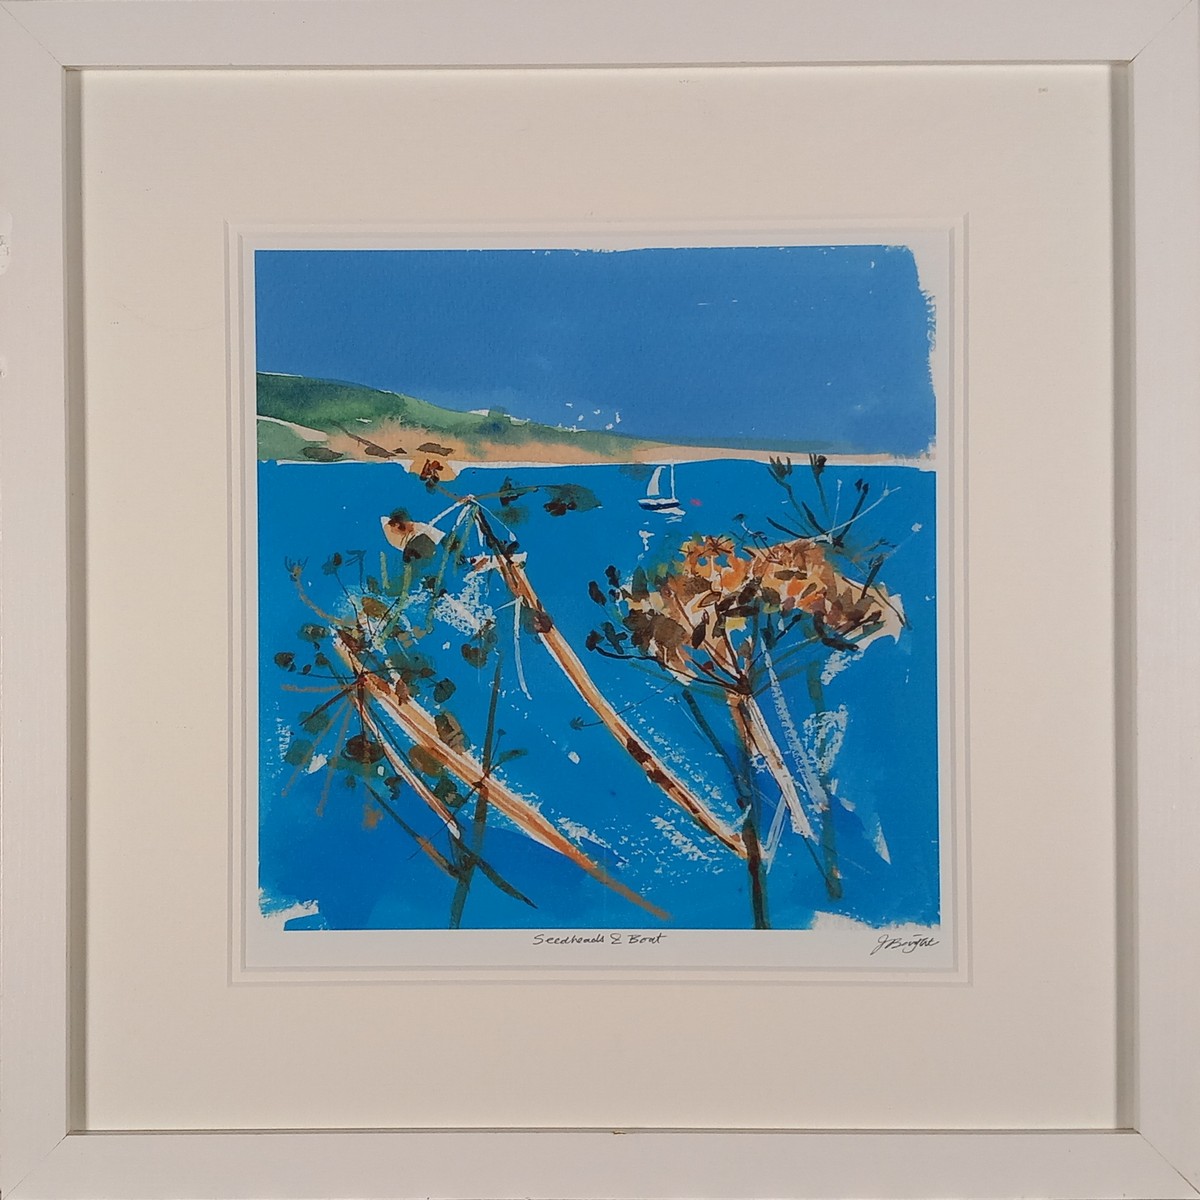 J BRIGHT (British 20th / 21st Century) Seedheads and Boat, Colour print, Signed lower right, - Image 2 of 3